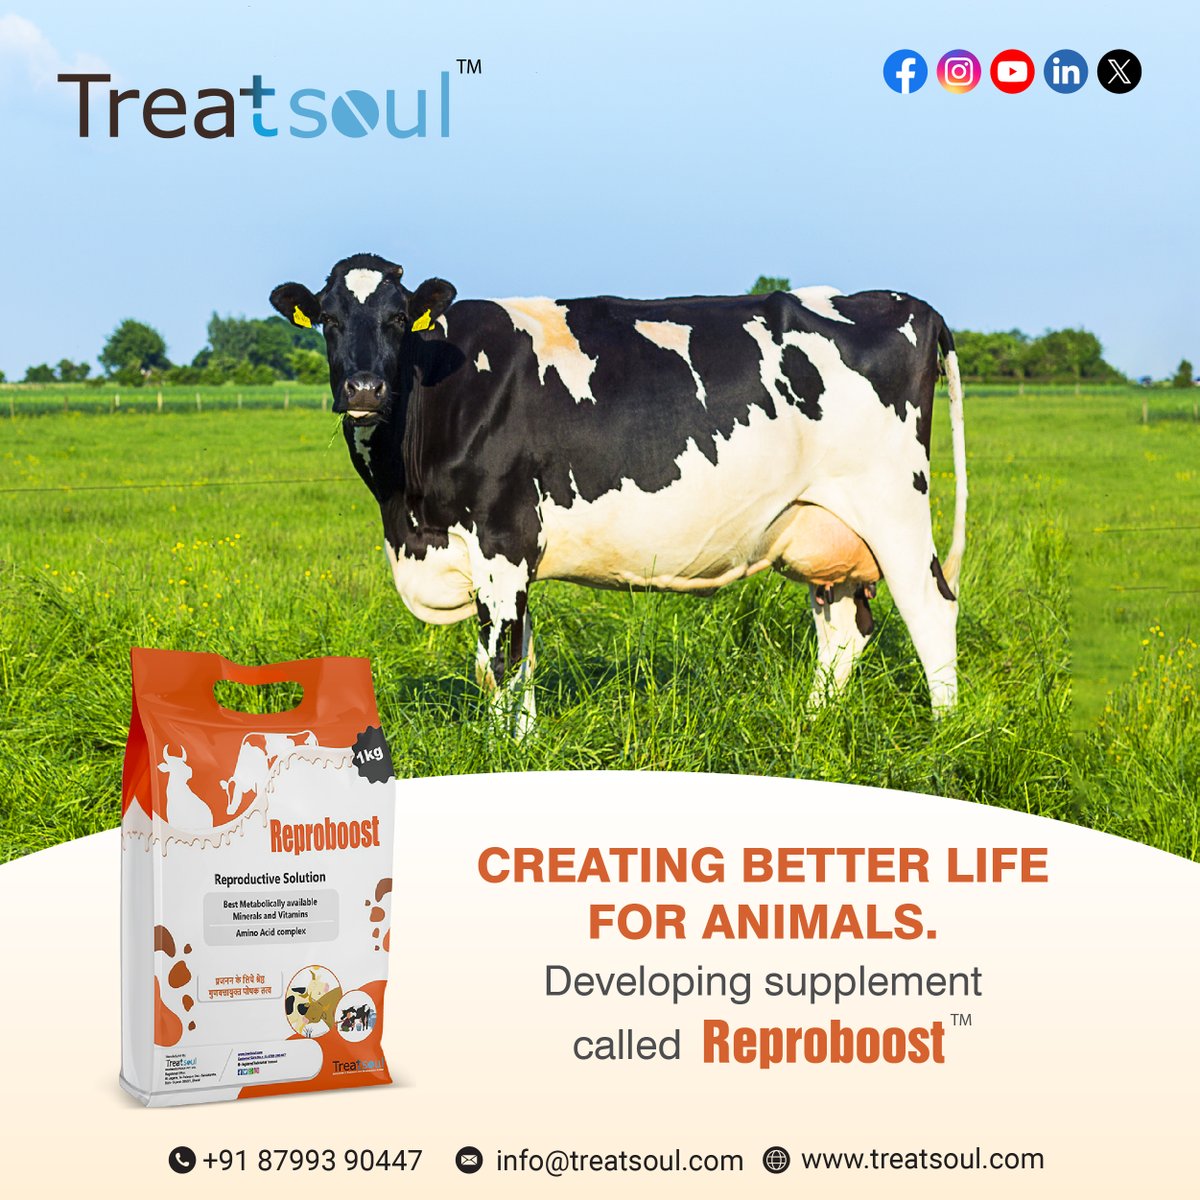 Discover Reproboost, our innovative supplement developed to enhance the health and performance of animals. With its unique formulation, Reproboost aims to optimize nutrition and support overall well-being, ensuring a better quality of life for our beloved animals.
#Treatsoul